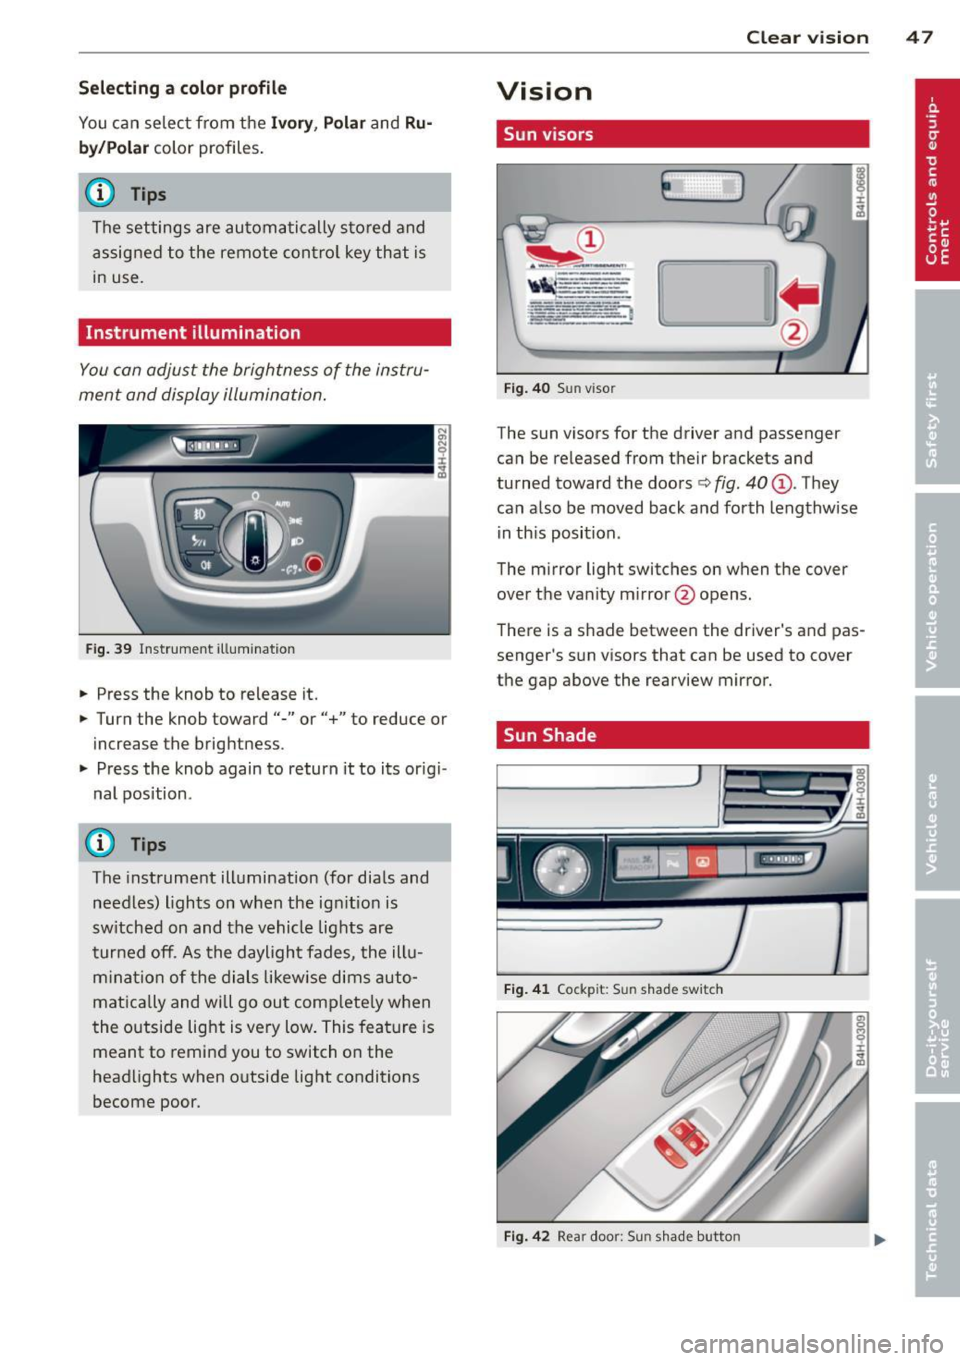 AUDI S8 2012  Owners Manual Selecting  a color  pr ofile 
You can select from  the Iv ory , Polar and Ru­
b y/ Pol ar 
color  profiles . 
(D Tips 
The settings  are automa tically  sto red and 
assigned to  the  remote  con tro